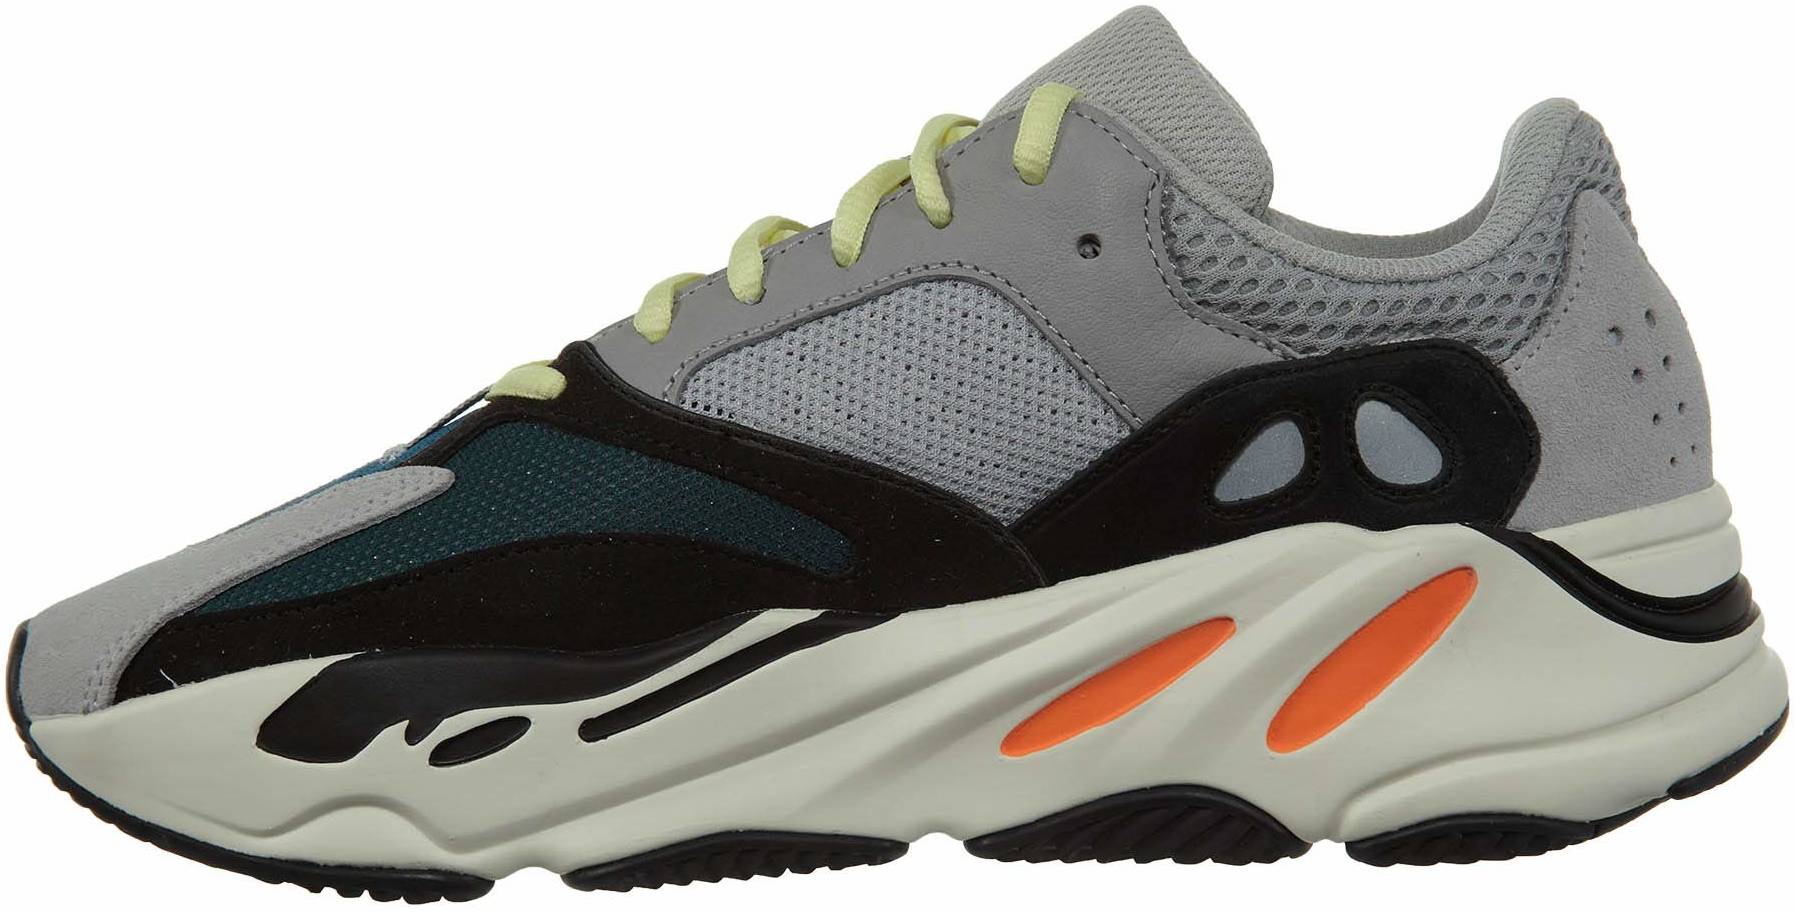 Adidas Yeezy Boost 700 sneakers in 10+ colors (only $180) | RunRepeat